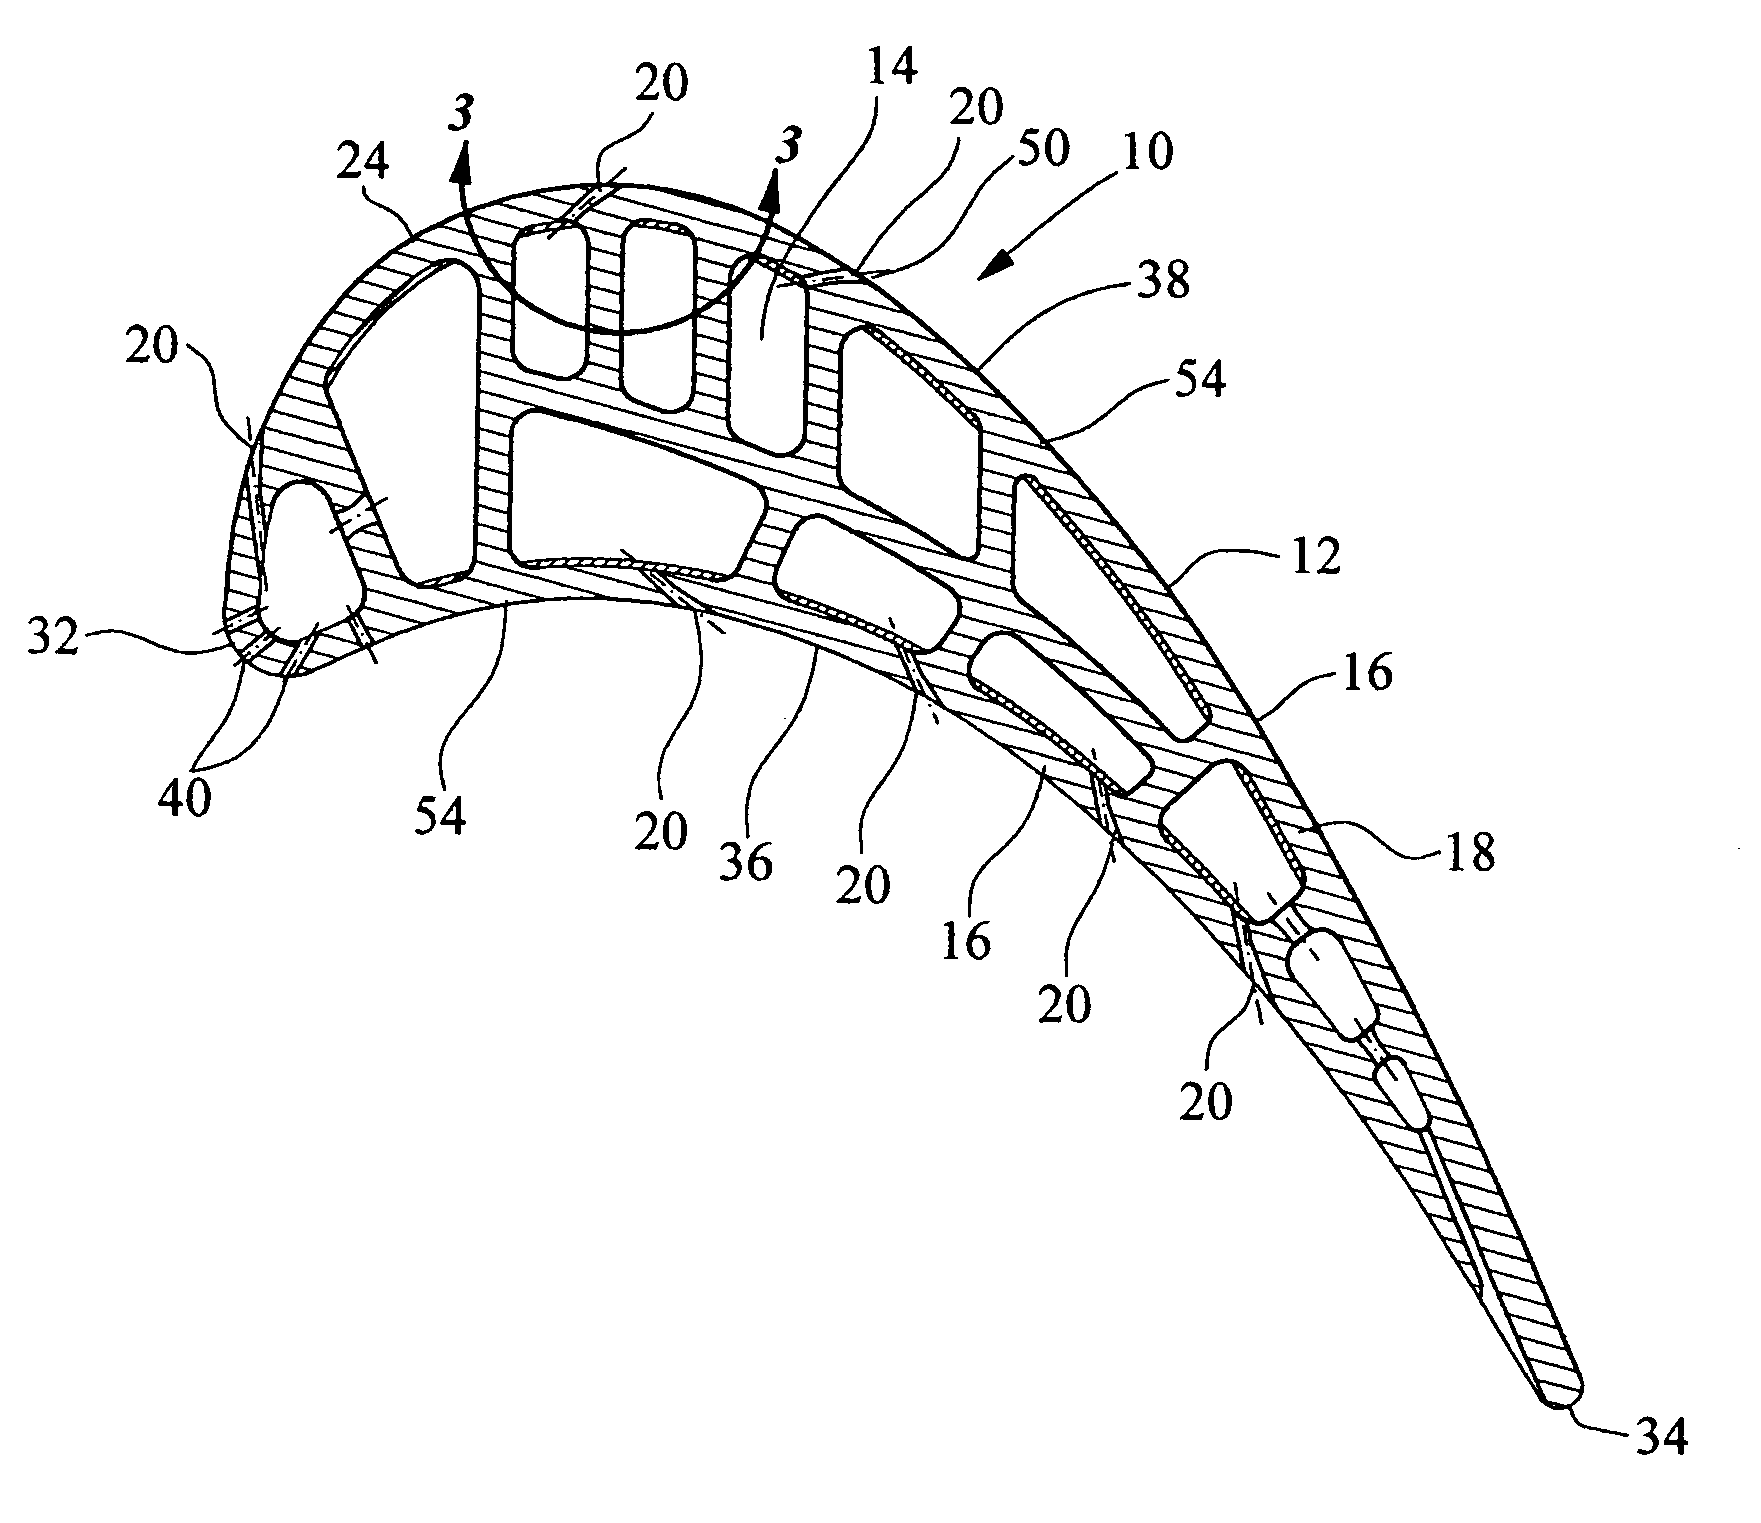 Turbine airfoil cooling system with elbowed, diffusion film cooling hole